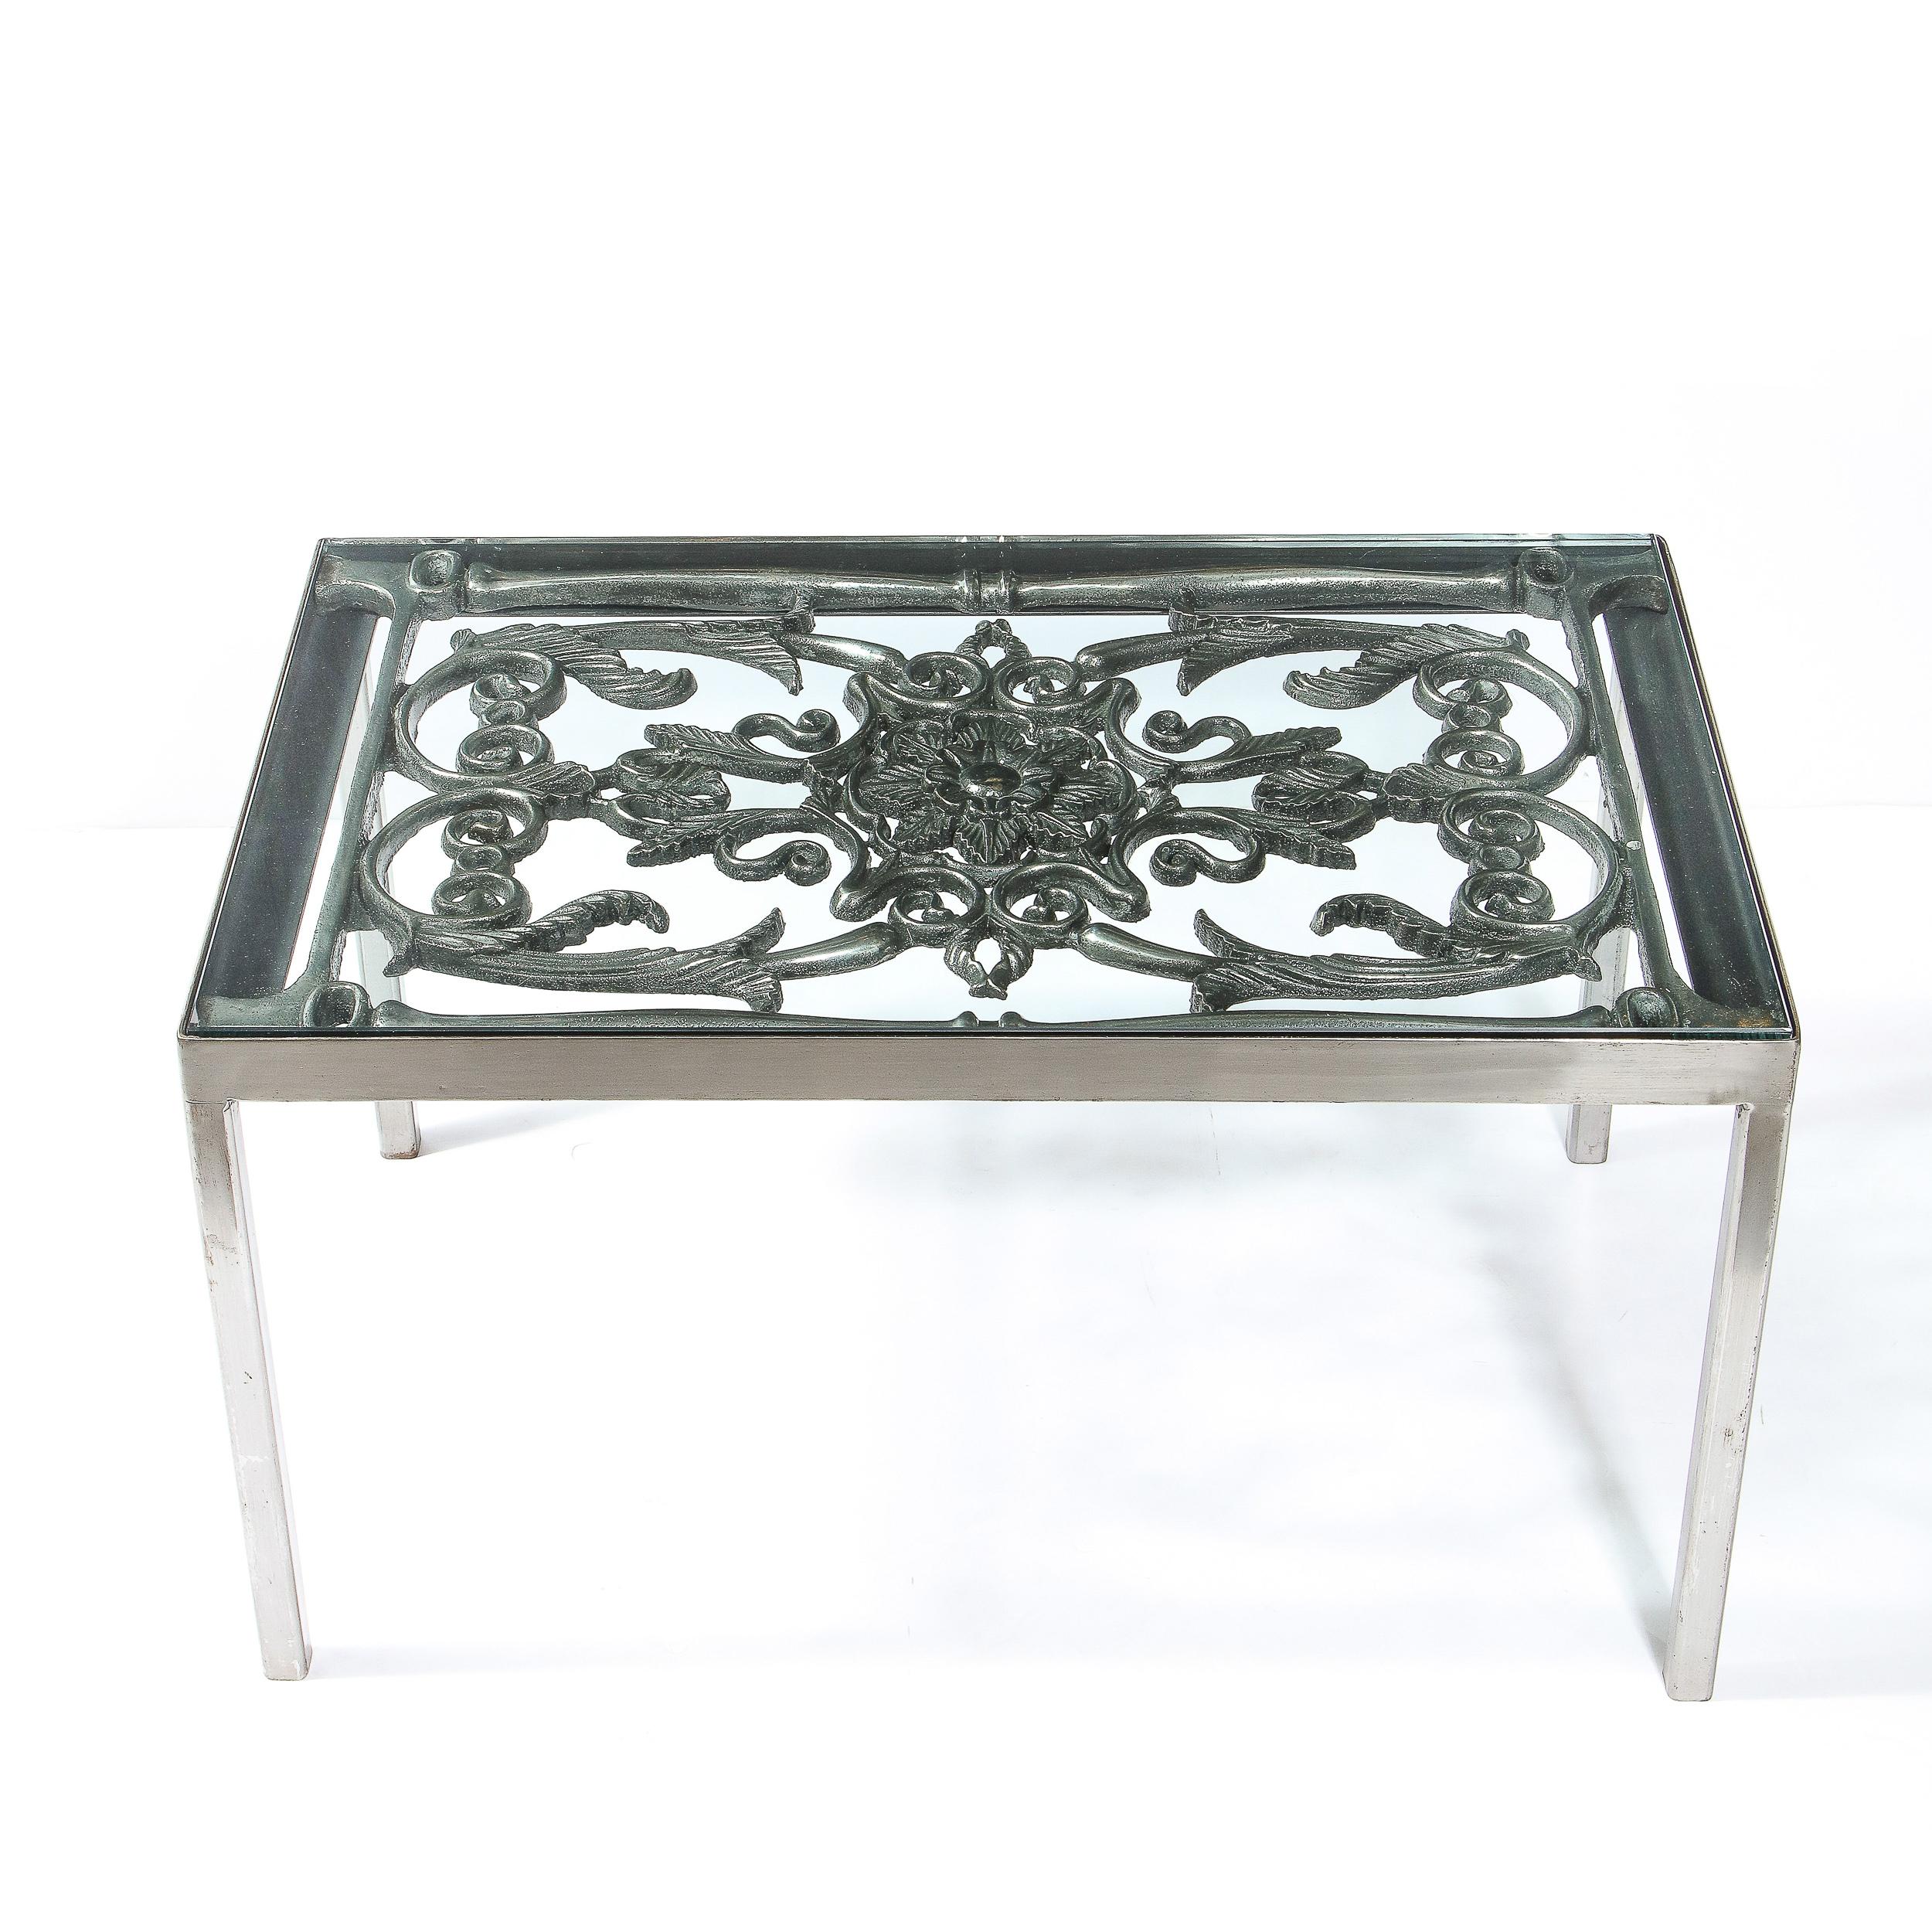 Mid-20th Century Art Deco Antique Burnished Cast-Iron Gate Cocktail Table with Floral Detailing For Sale